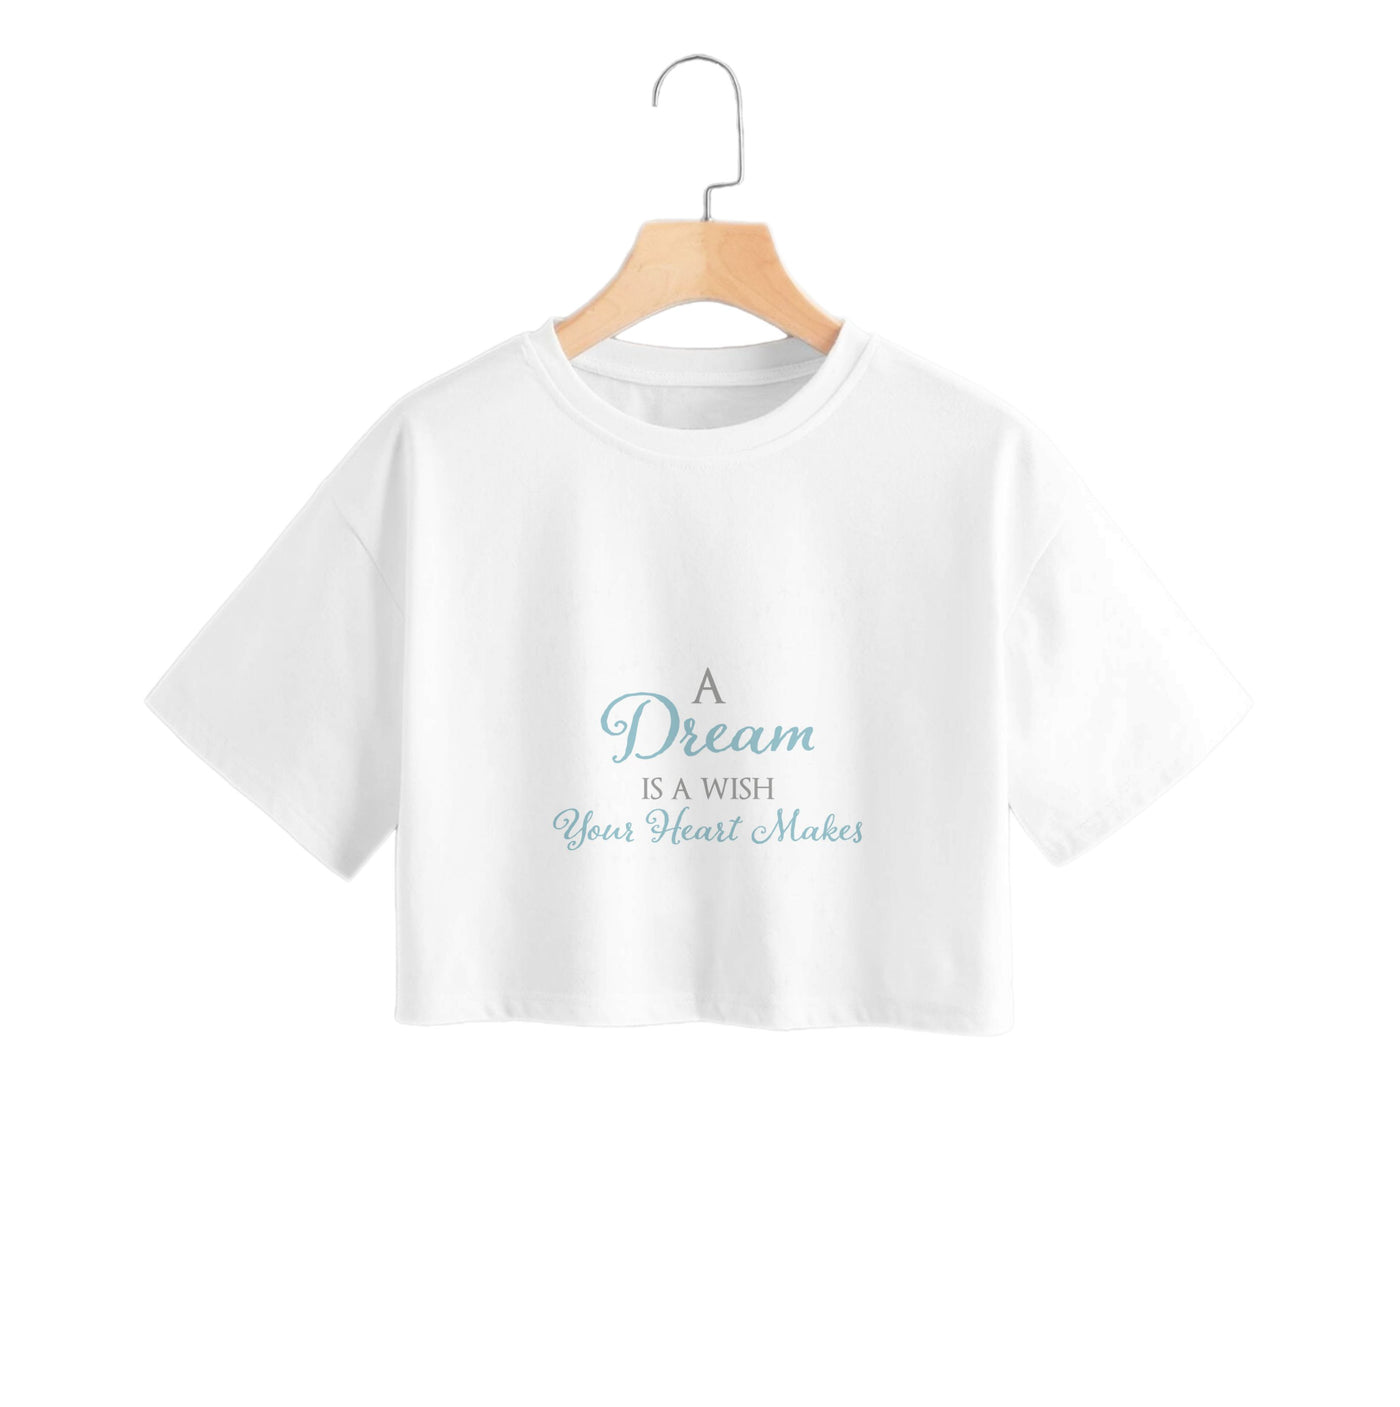 A Dream Is A Wish Your Heart Makes - Disney Crop Top